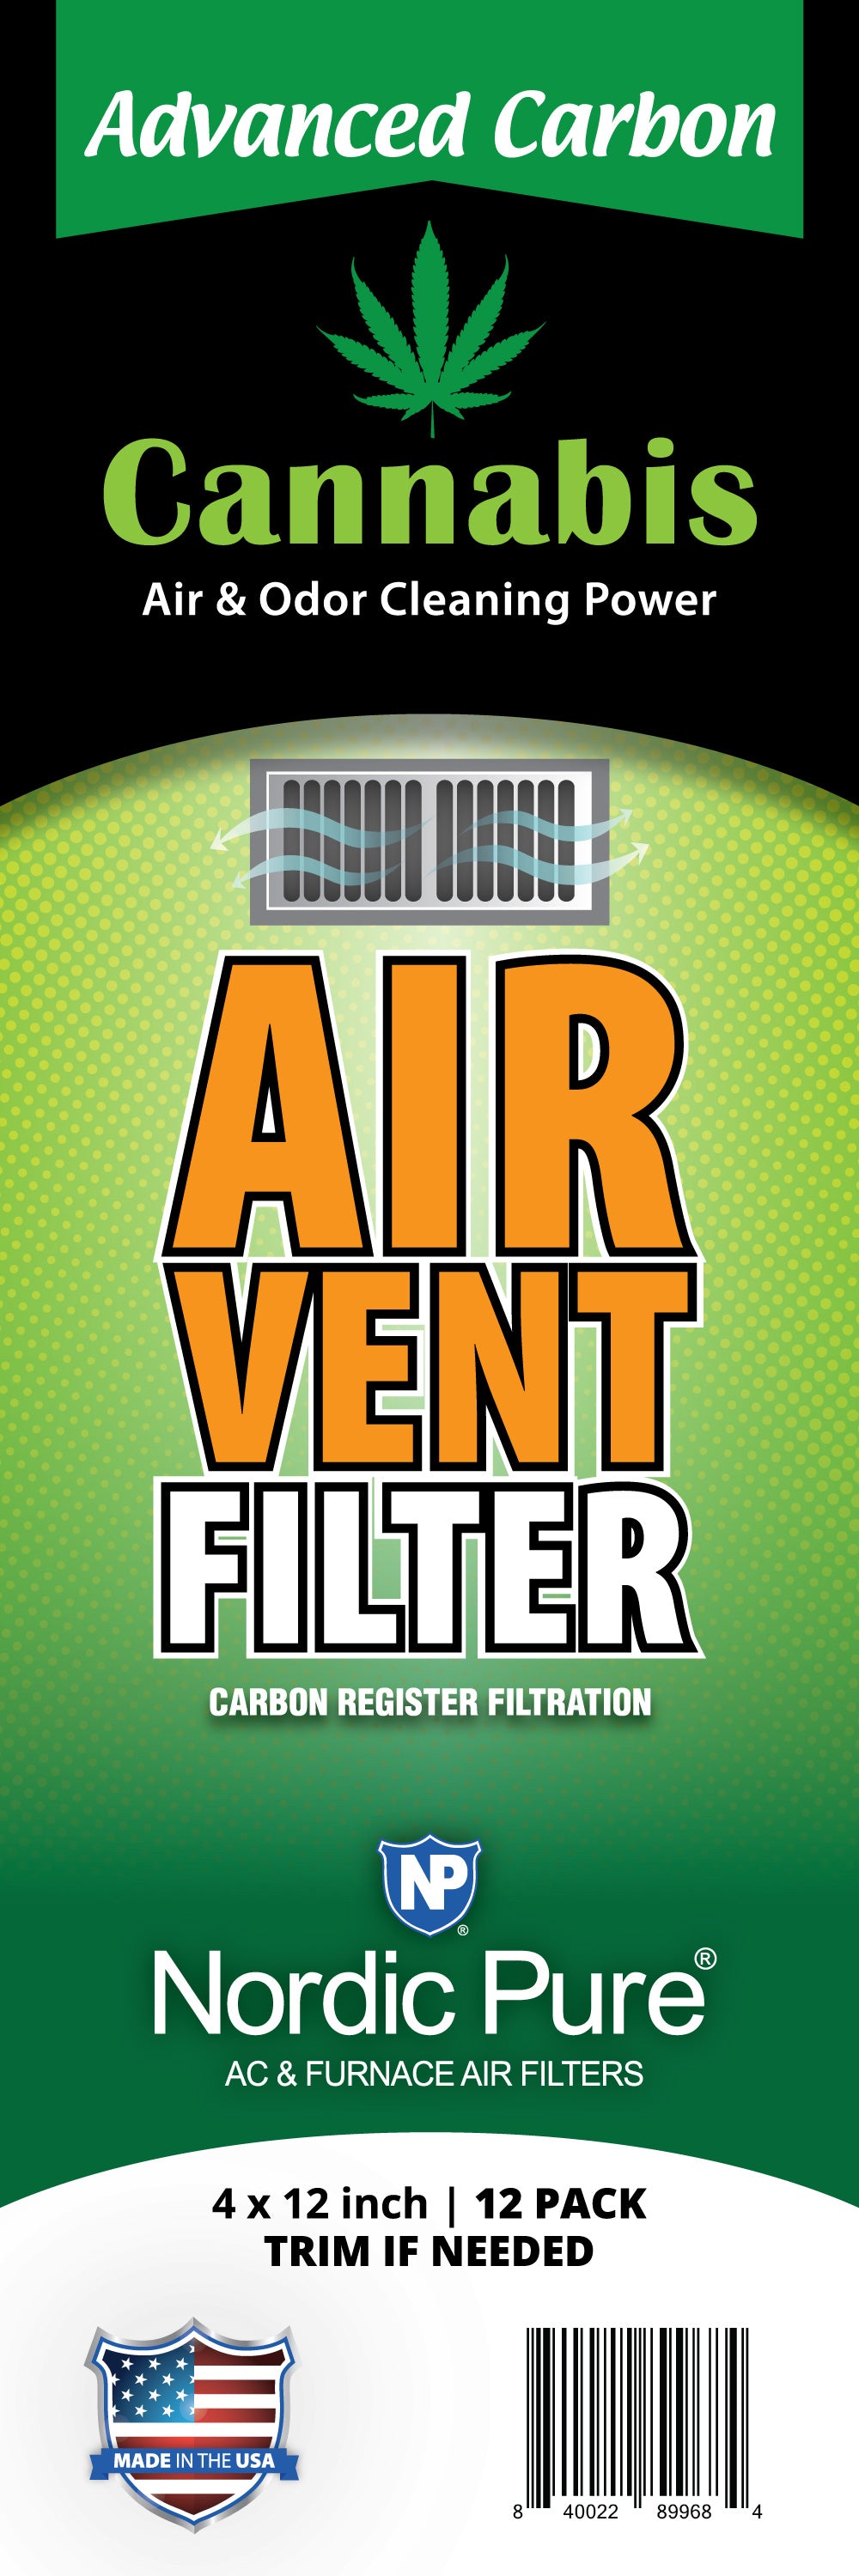 Cannabis Odor Reducing Advanced Carbon Air Vent Filters 4x12 (Register Vent Filters)